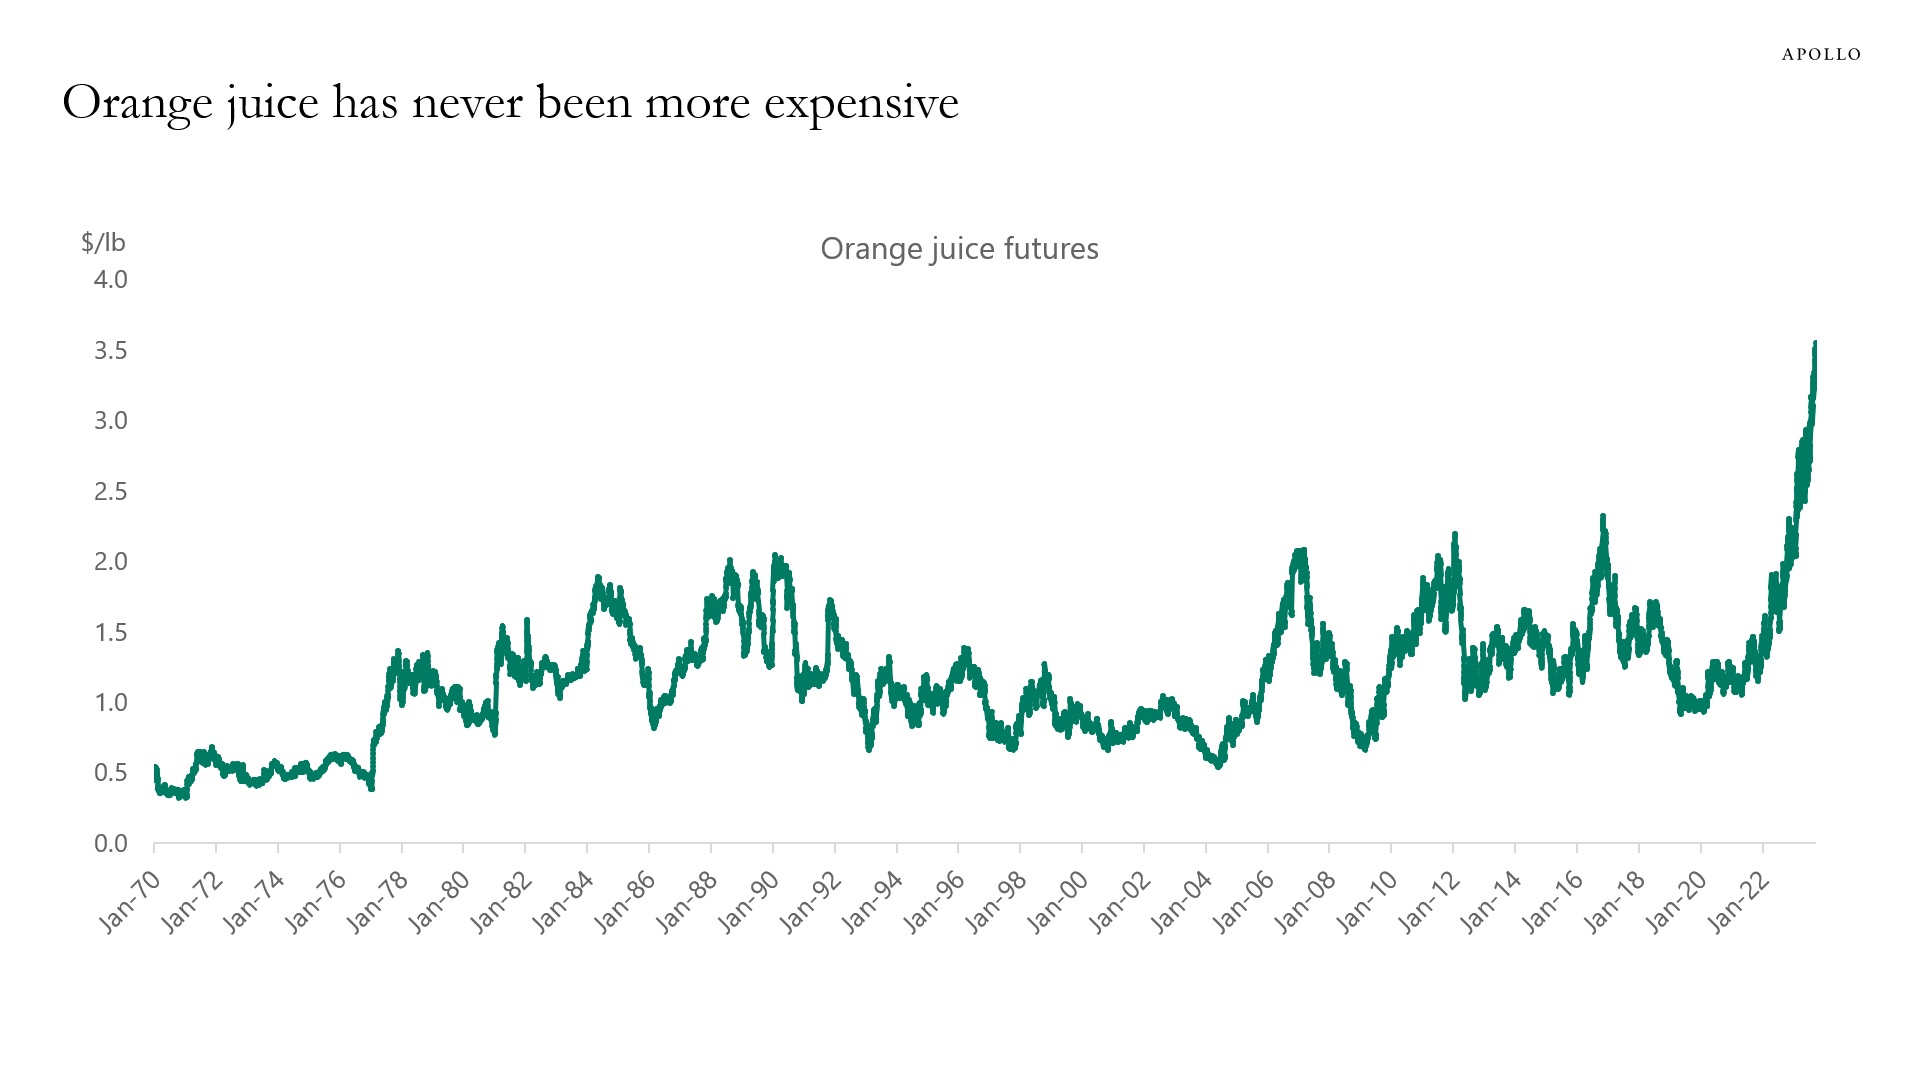 The price of OJ is at a record high.